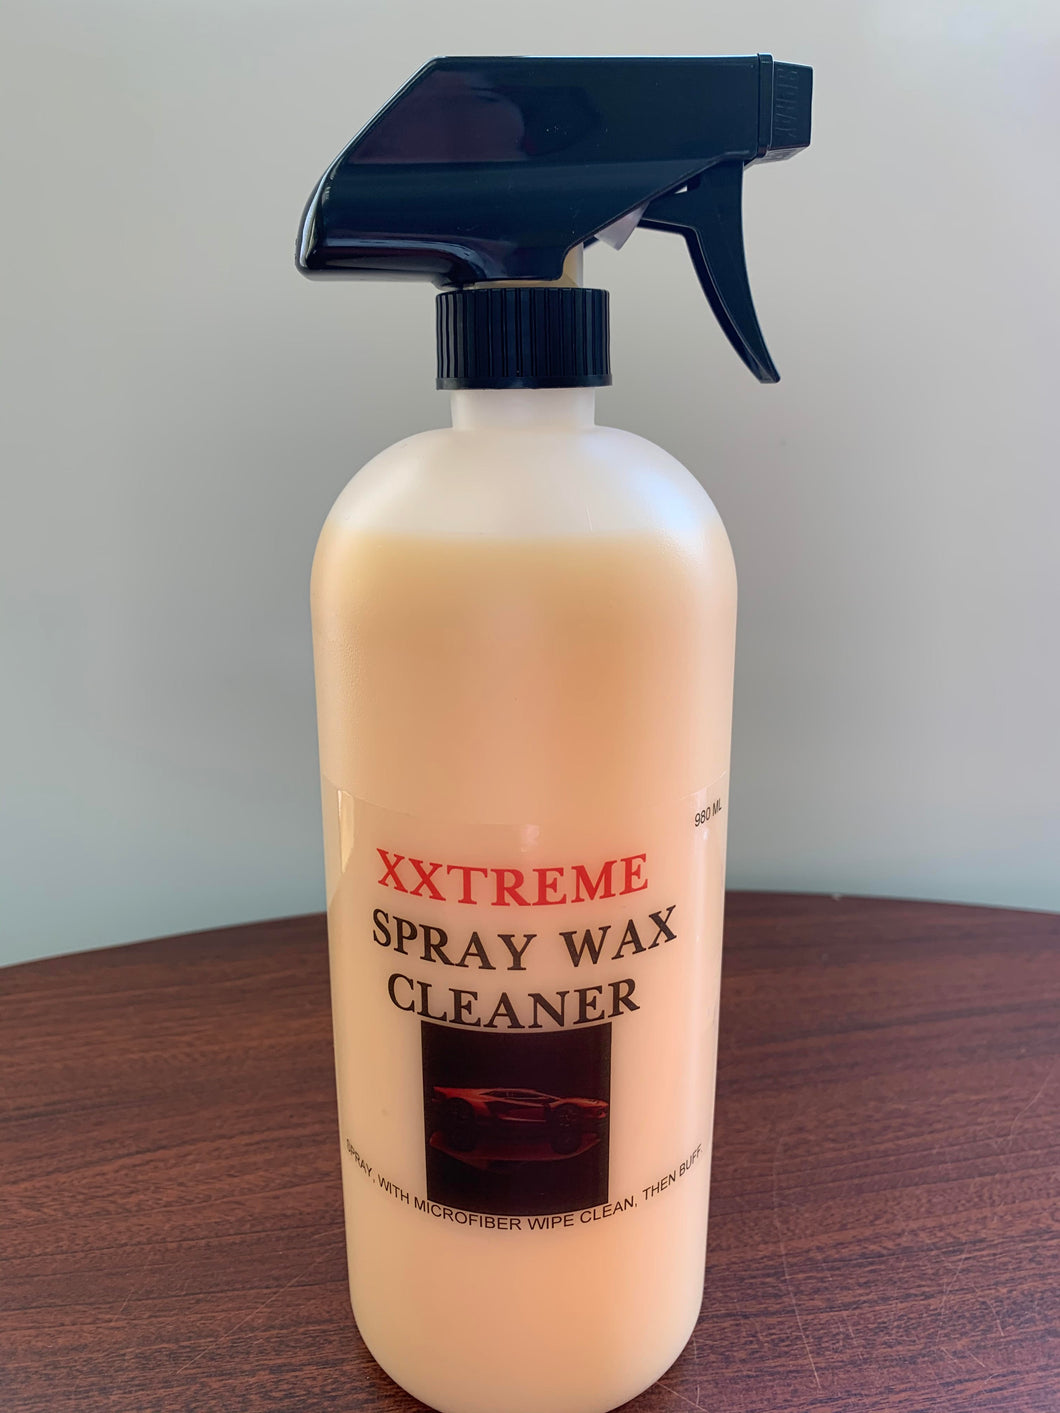 EXTREME: Spray Wax Cleaner